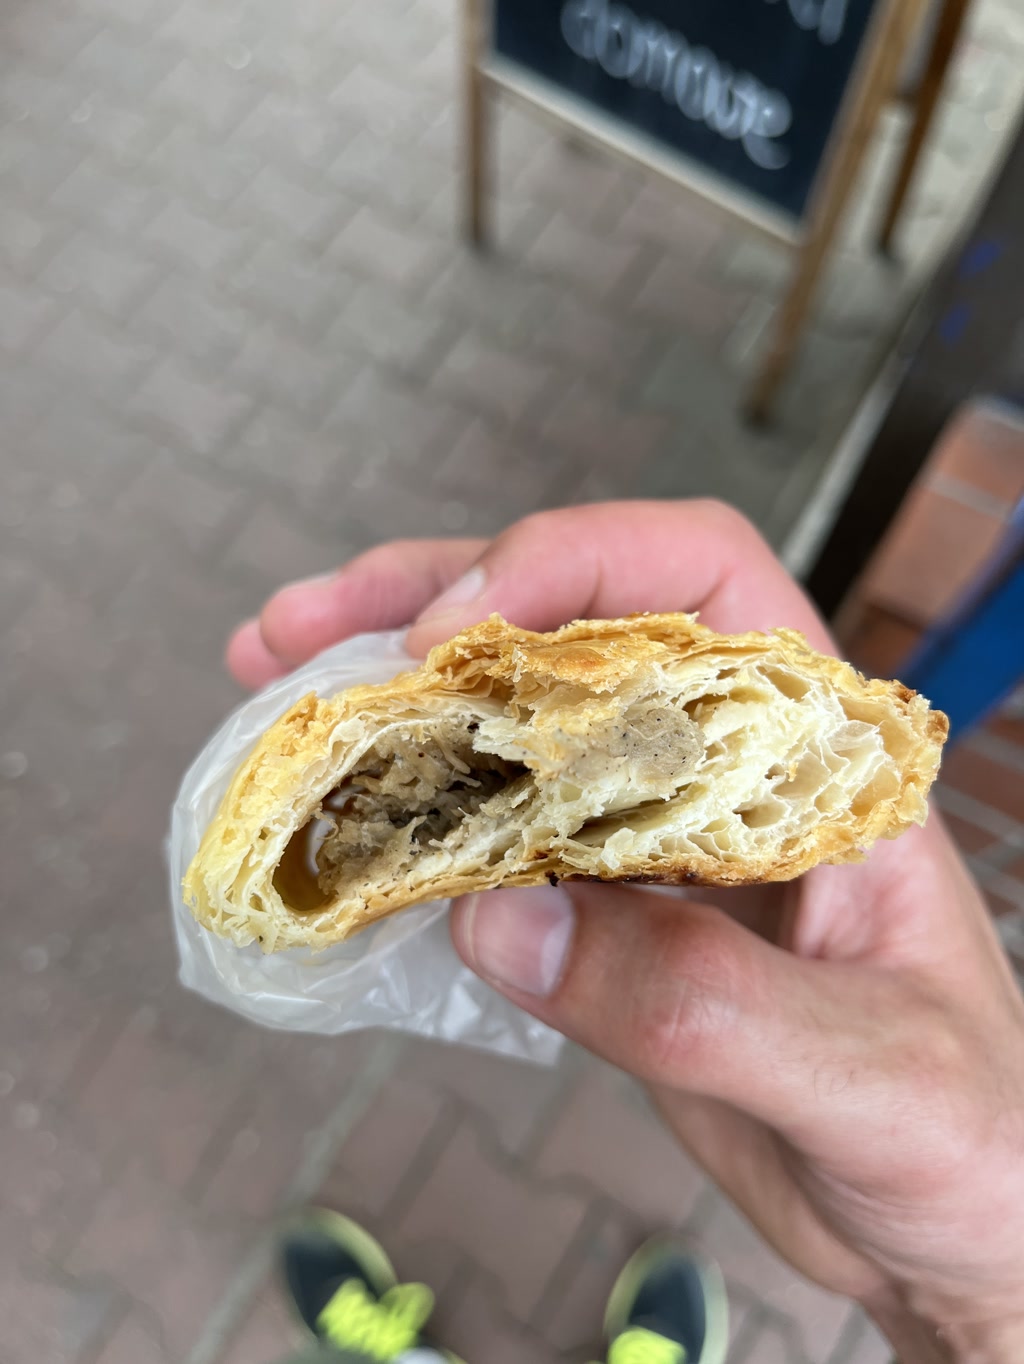 A person is holding a half-eaten savory pastry with a flaky, golden-brown crust in their hand. The pastry's layered interior is visible, filled with a ground meat mixture that appears seasoned, suggesting it might be a meat pie or a sausage roll. The hand is holding a small clear plastic bag wrapped around the bottom half of the pastry, possibly for cleanliness while eating. In the background, there is a blurred facade of a building with glass doors and a sign above them, though the text is indiscernible and not the focus of the scene.